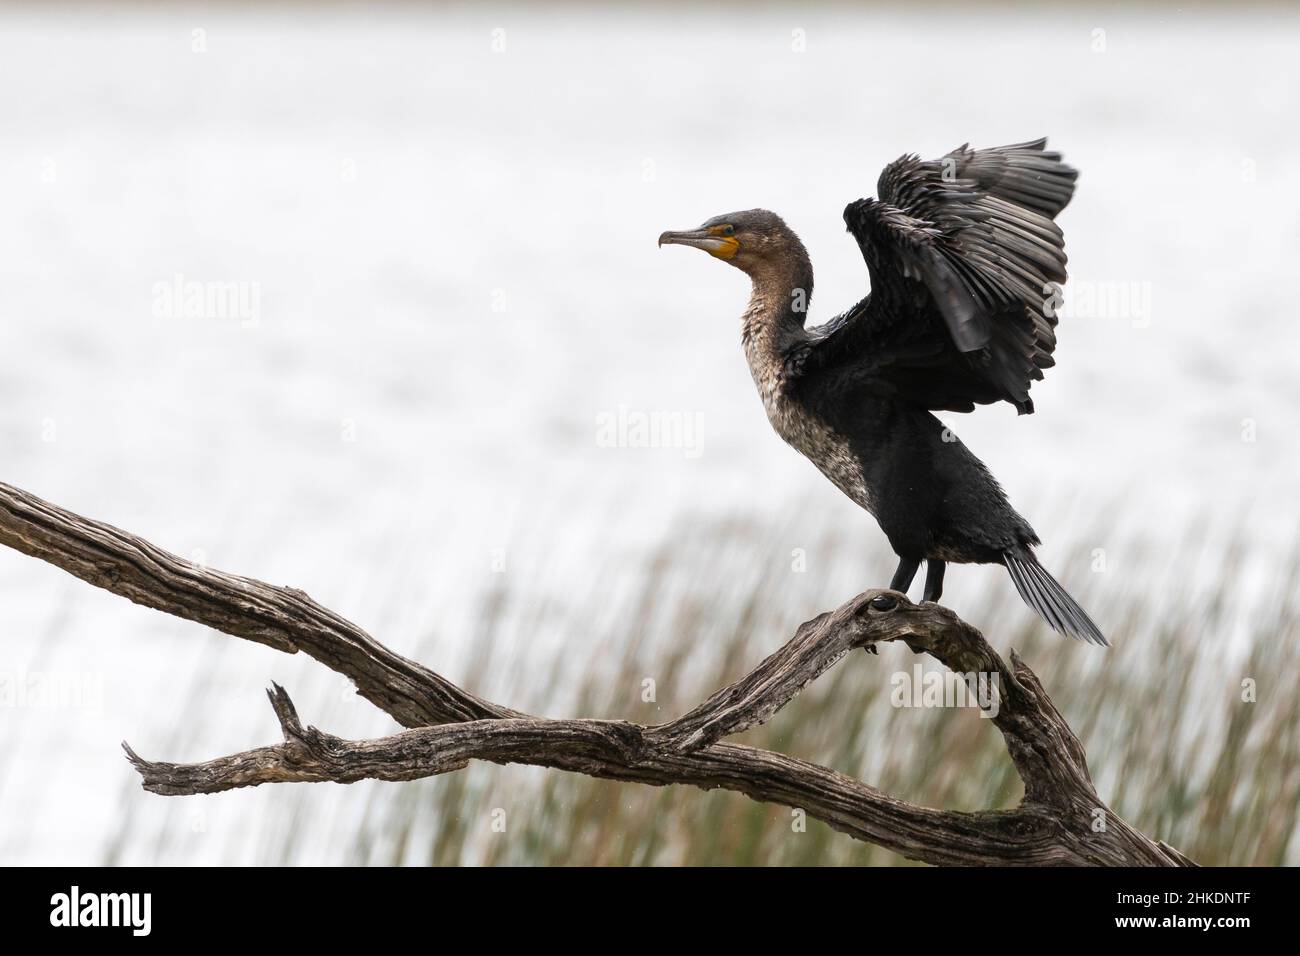 White-breasted Cormorant  (Phalacrocorax  lucidus) in rain, Rondevlei, Wilderness, Western Cape, South Africa Stock Photo